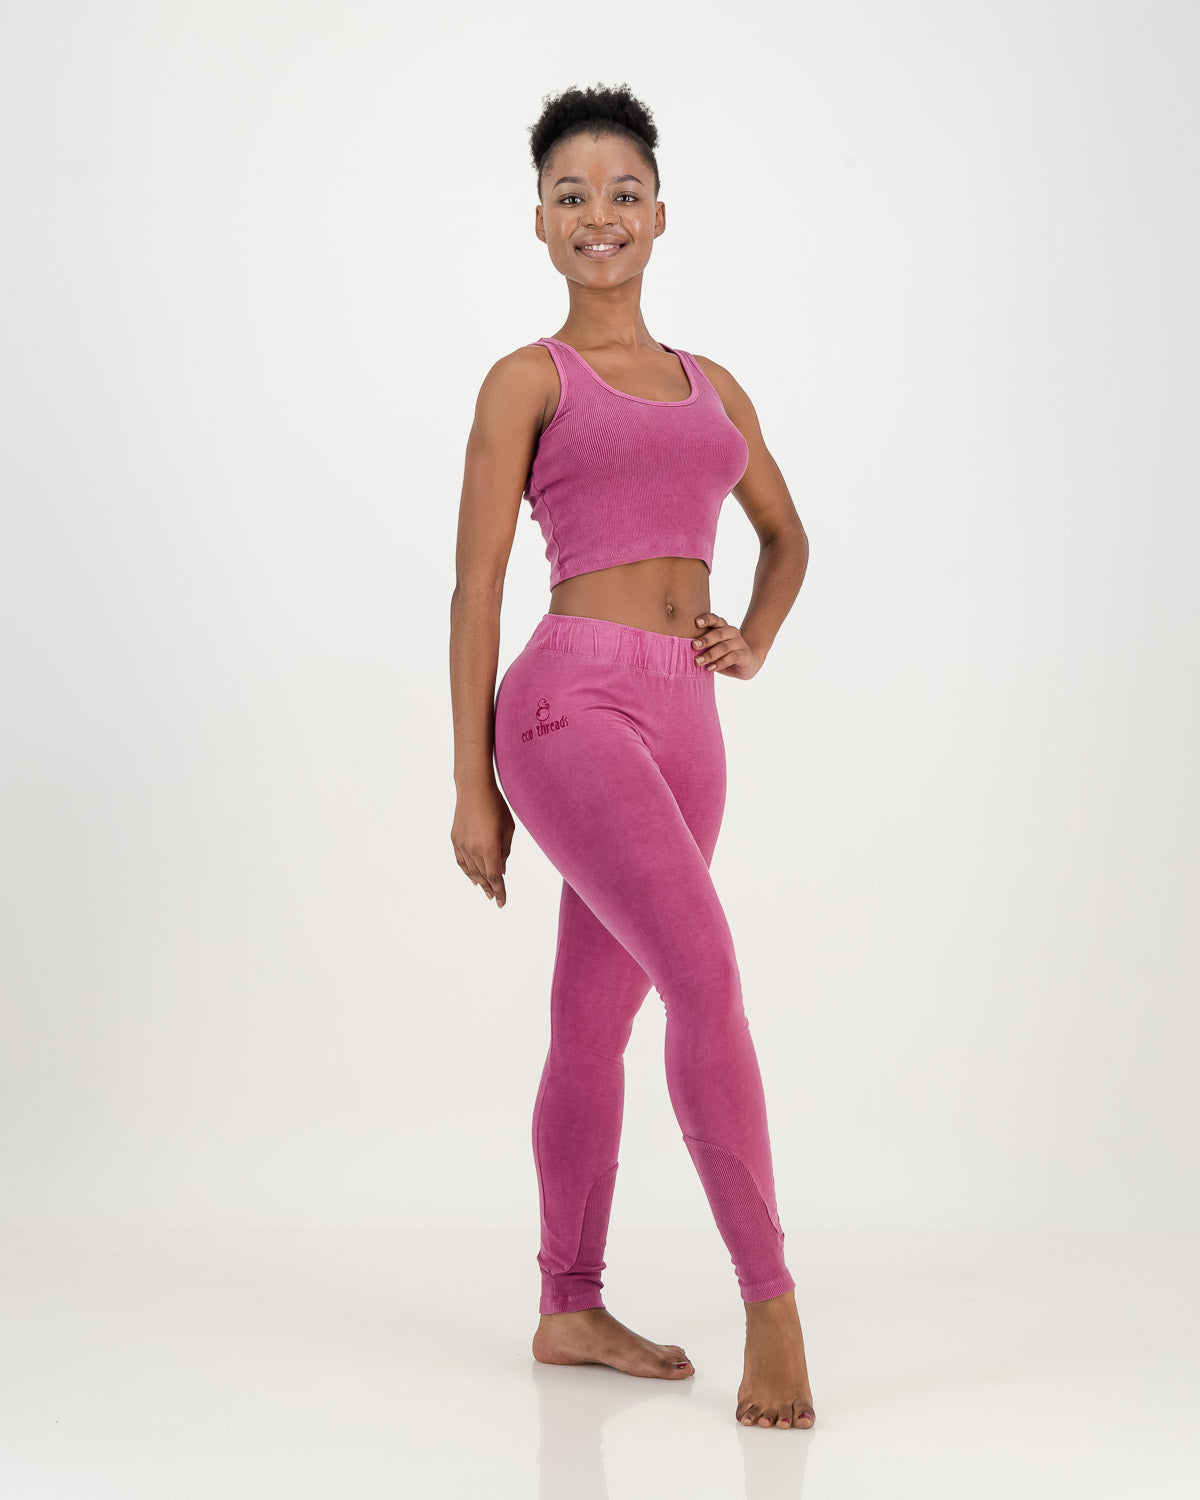 Cropped Cotton magenta Vest top with matching cotton leggings